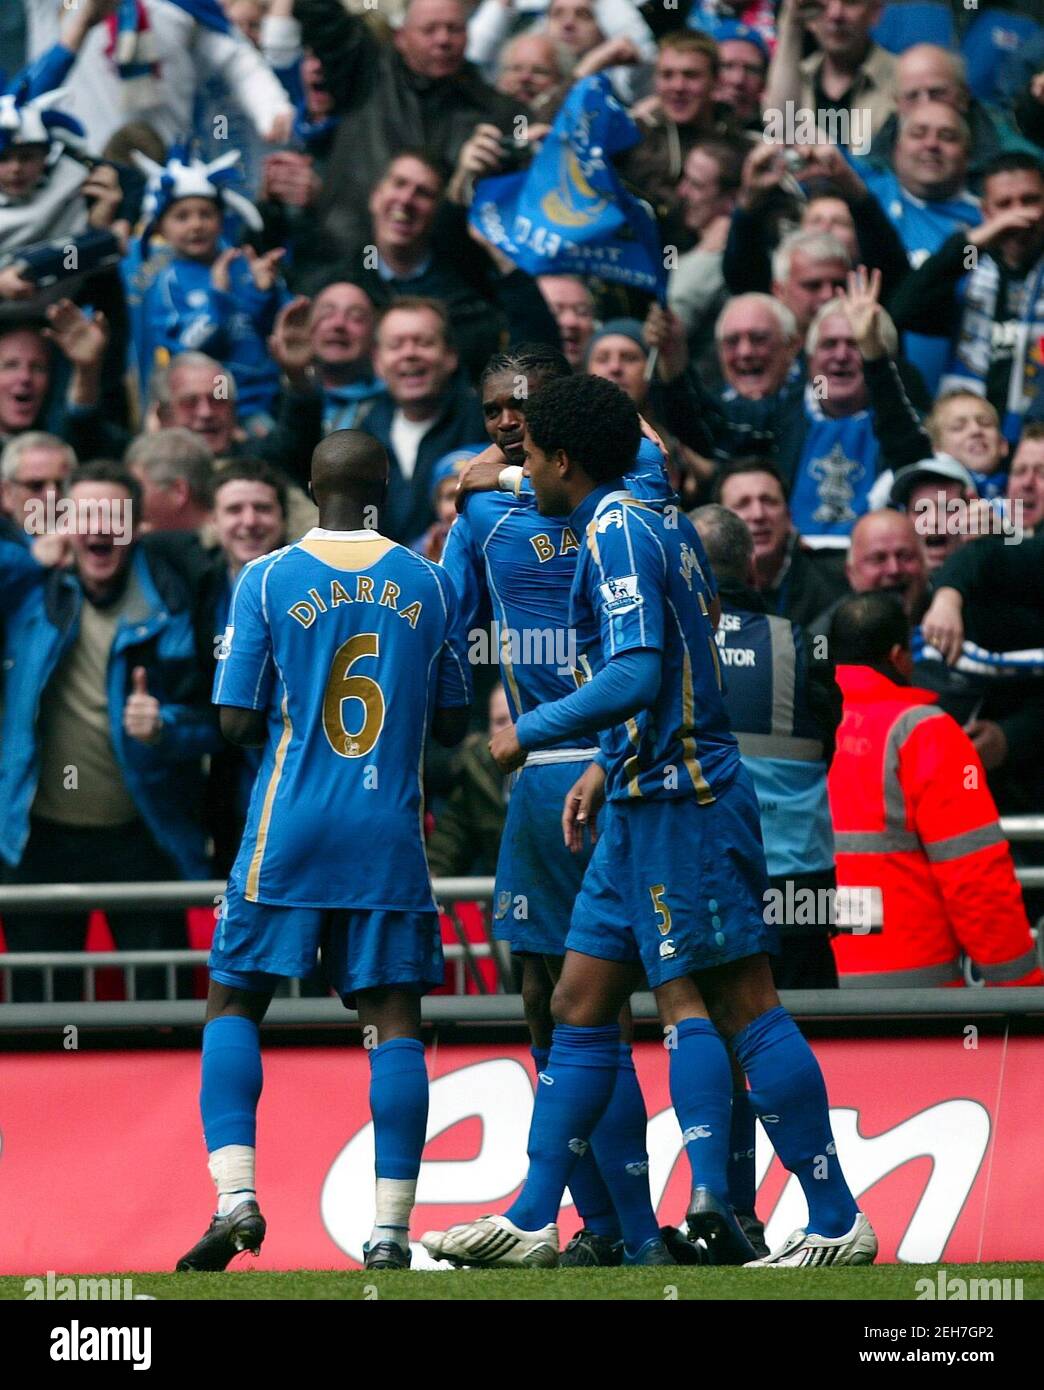 Football - Portsmouth v West Bromwich Albion - FA Cup Semi Final - Wembley Stadium - 07/08 - 5/4/08  Nwankwo Kanu celebrates scoring the first goal for Portsmouth with Lassana Diarra (L) and Glen Johnson (R)  Mandatory Credit: Action Images / Peter Cziborra Stock Photo